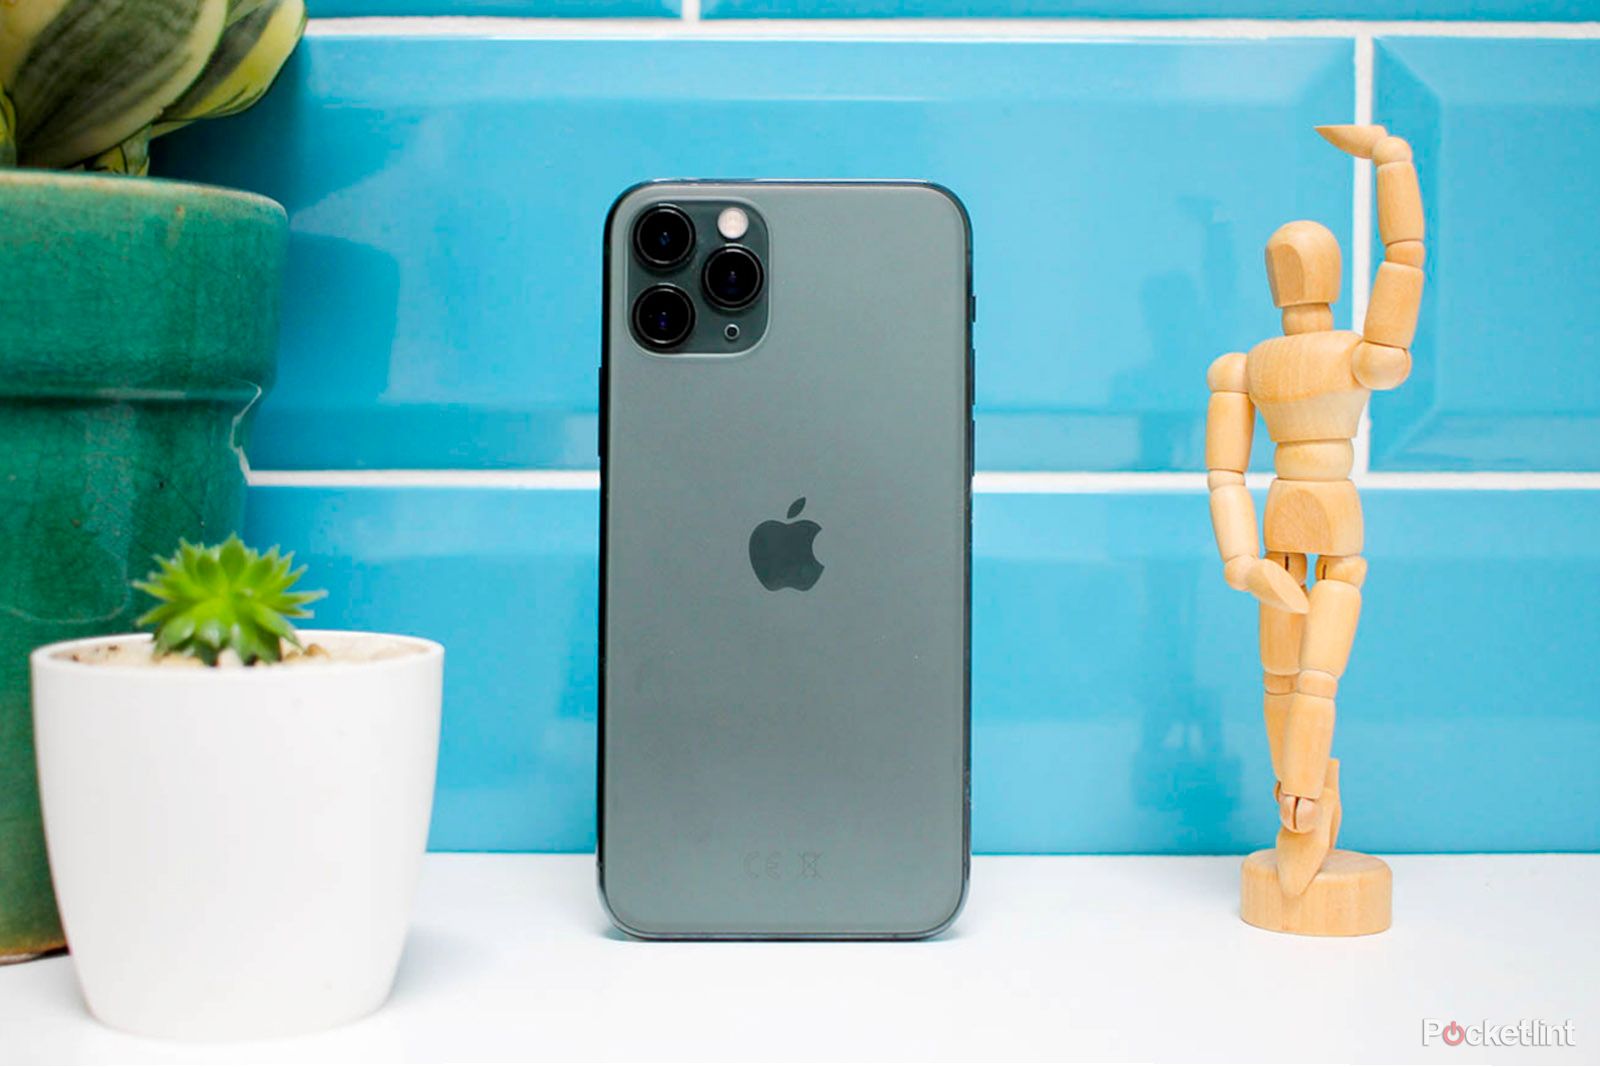 Apple iPhone 11 Pro Long-Term Review: Knockout Design, Camera